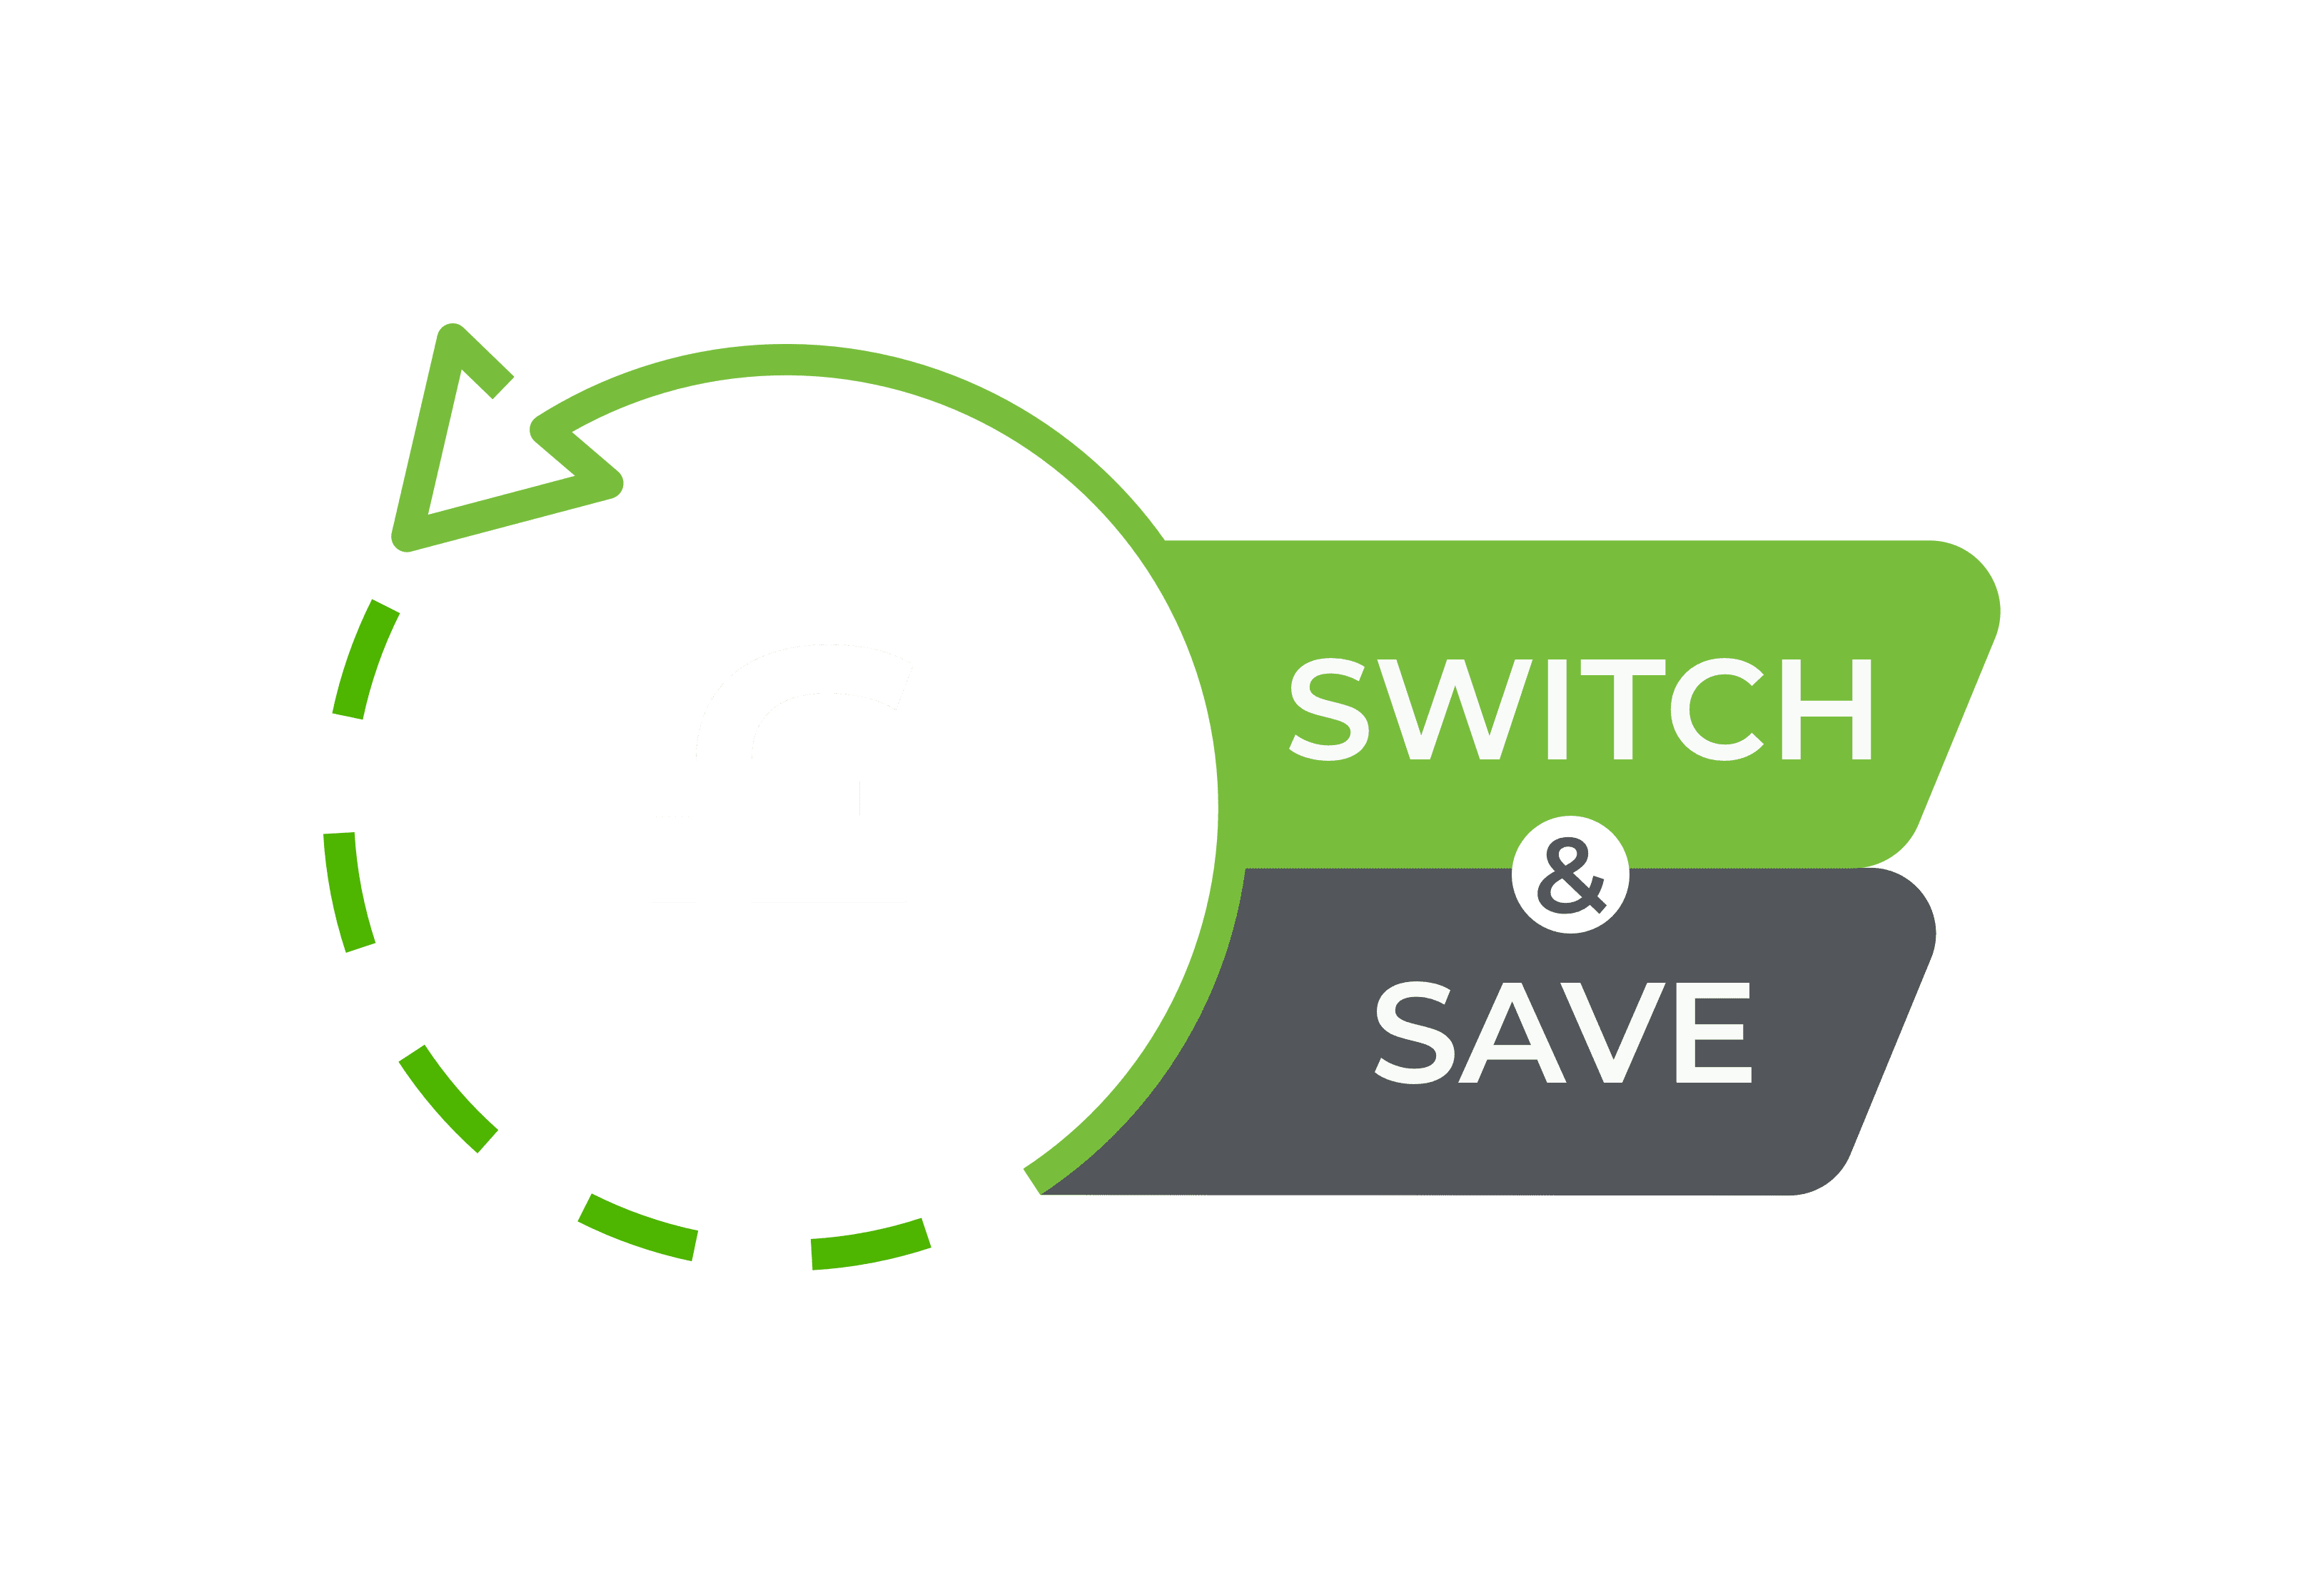 SWITCH AND SAVE